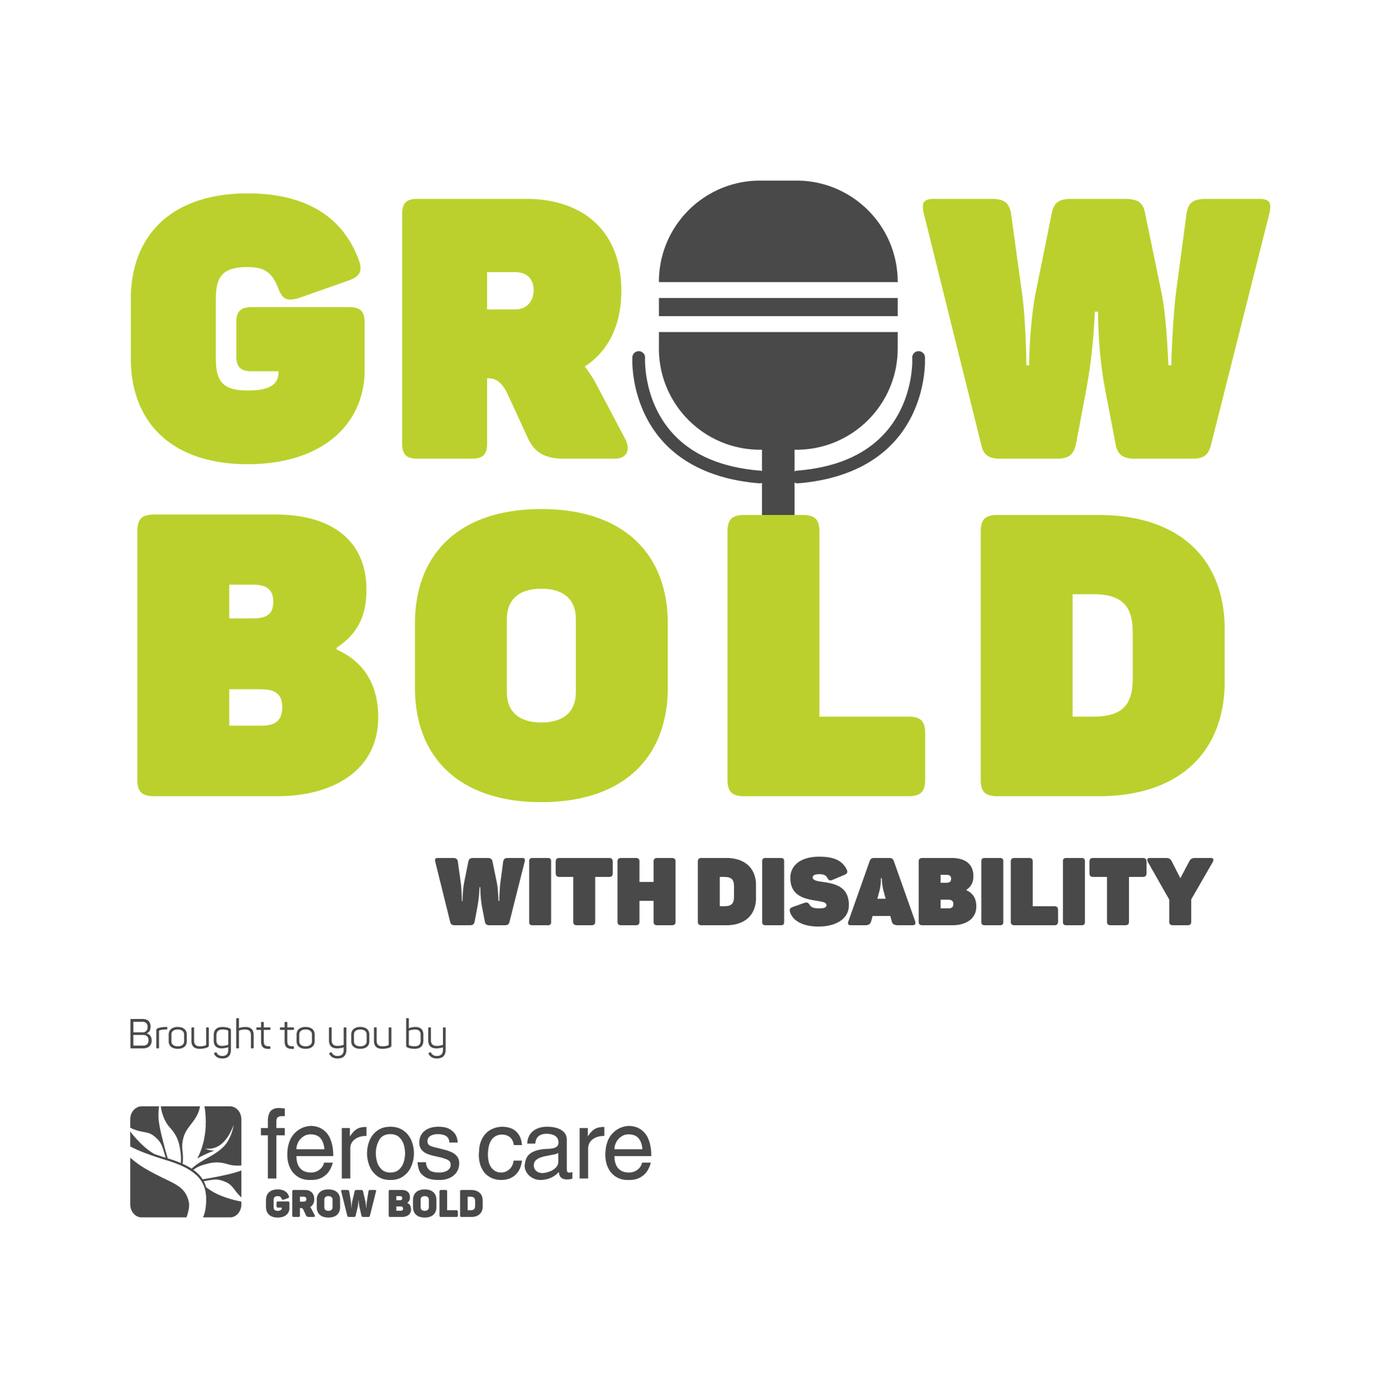 Introducing Grow Bold with Disability